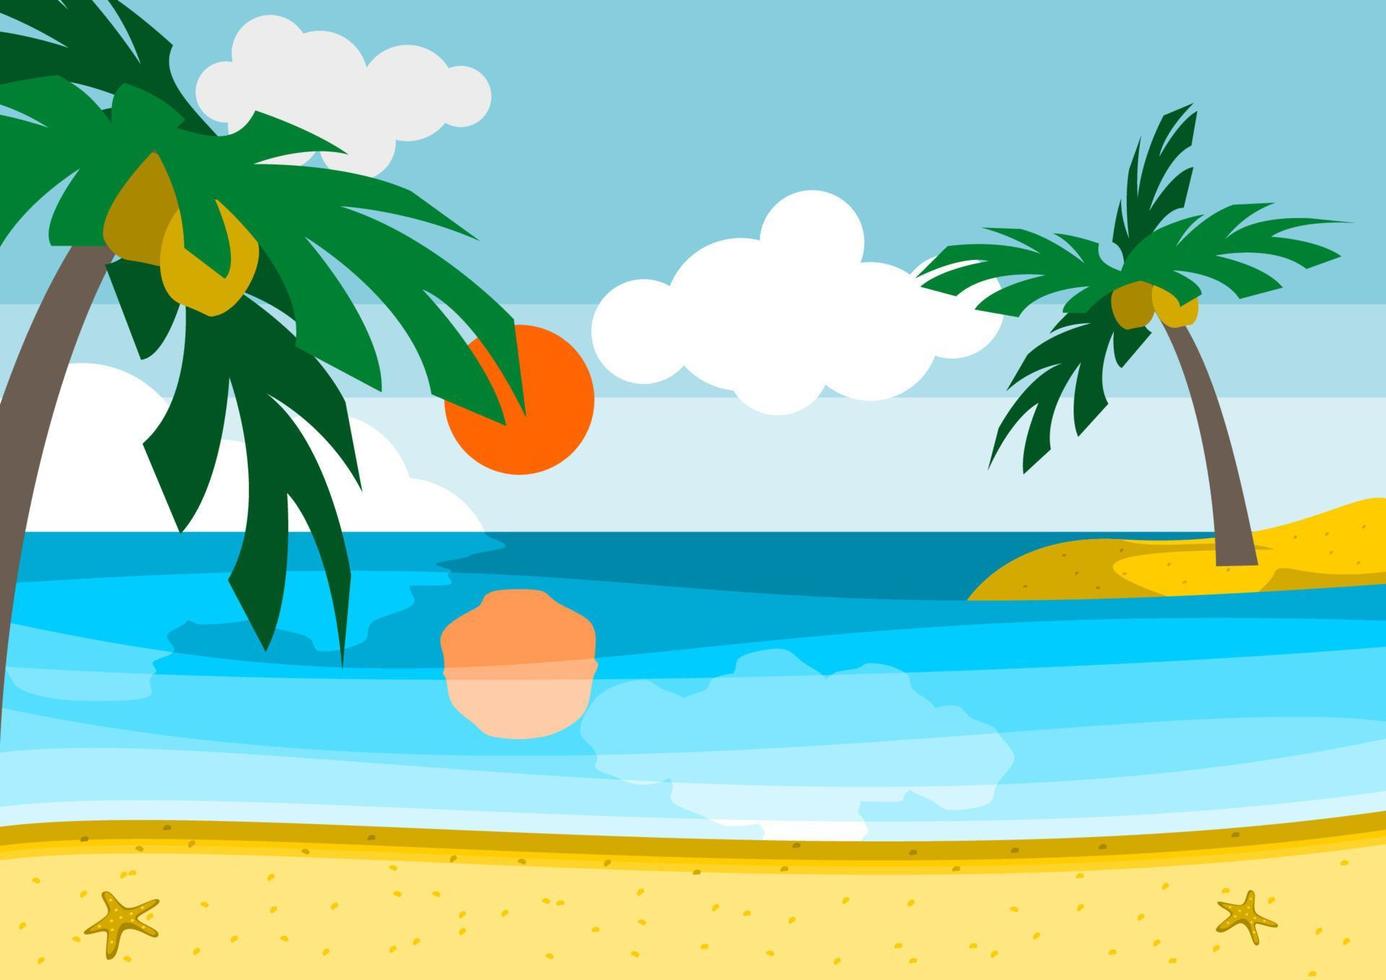 Editable Summer Beach Landscape With Flat Style Vector Illustration for Vacation or Children Book Illustration and Summer Seasonal Themed Project